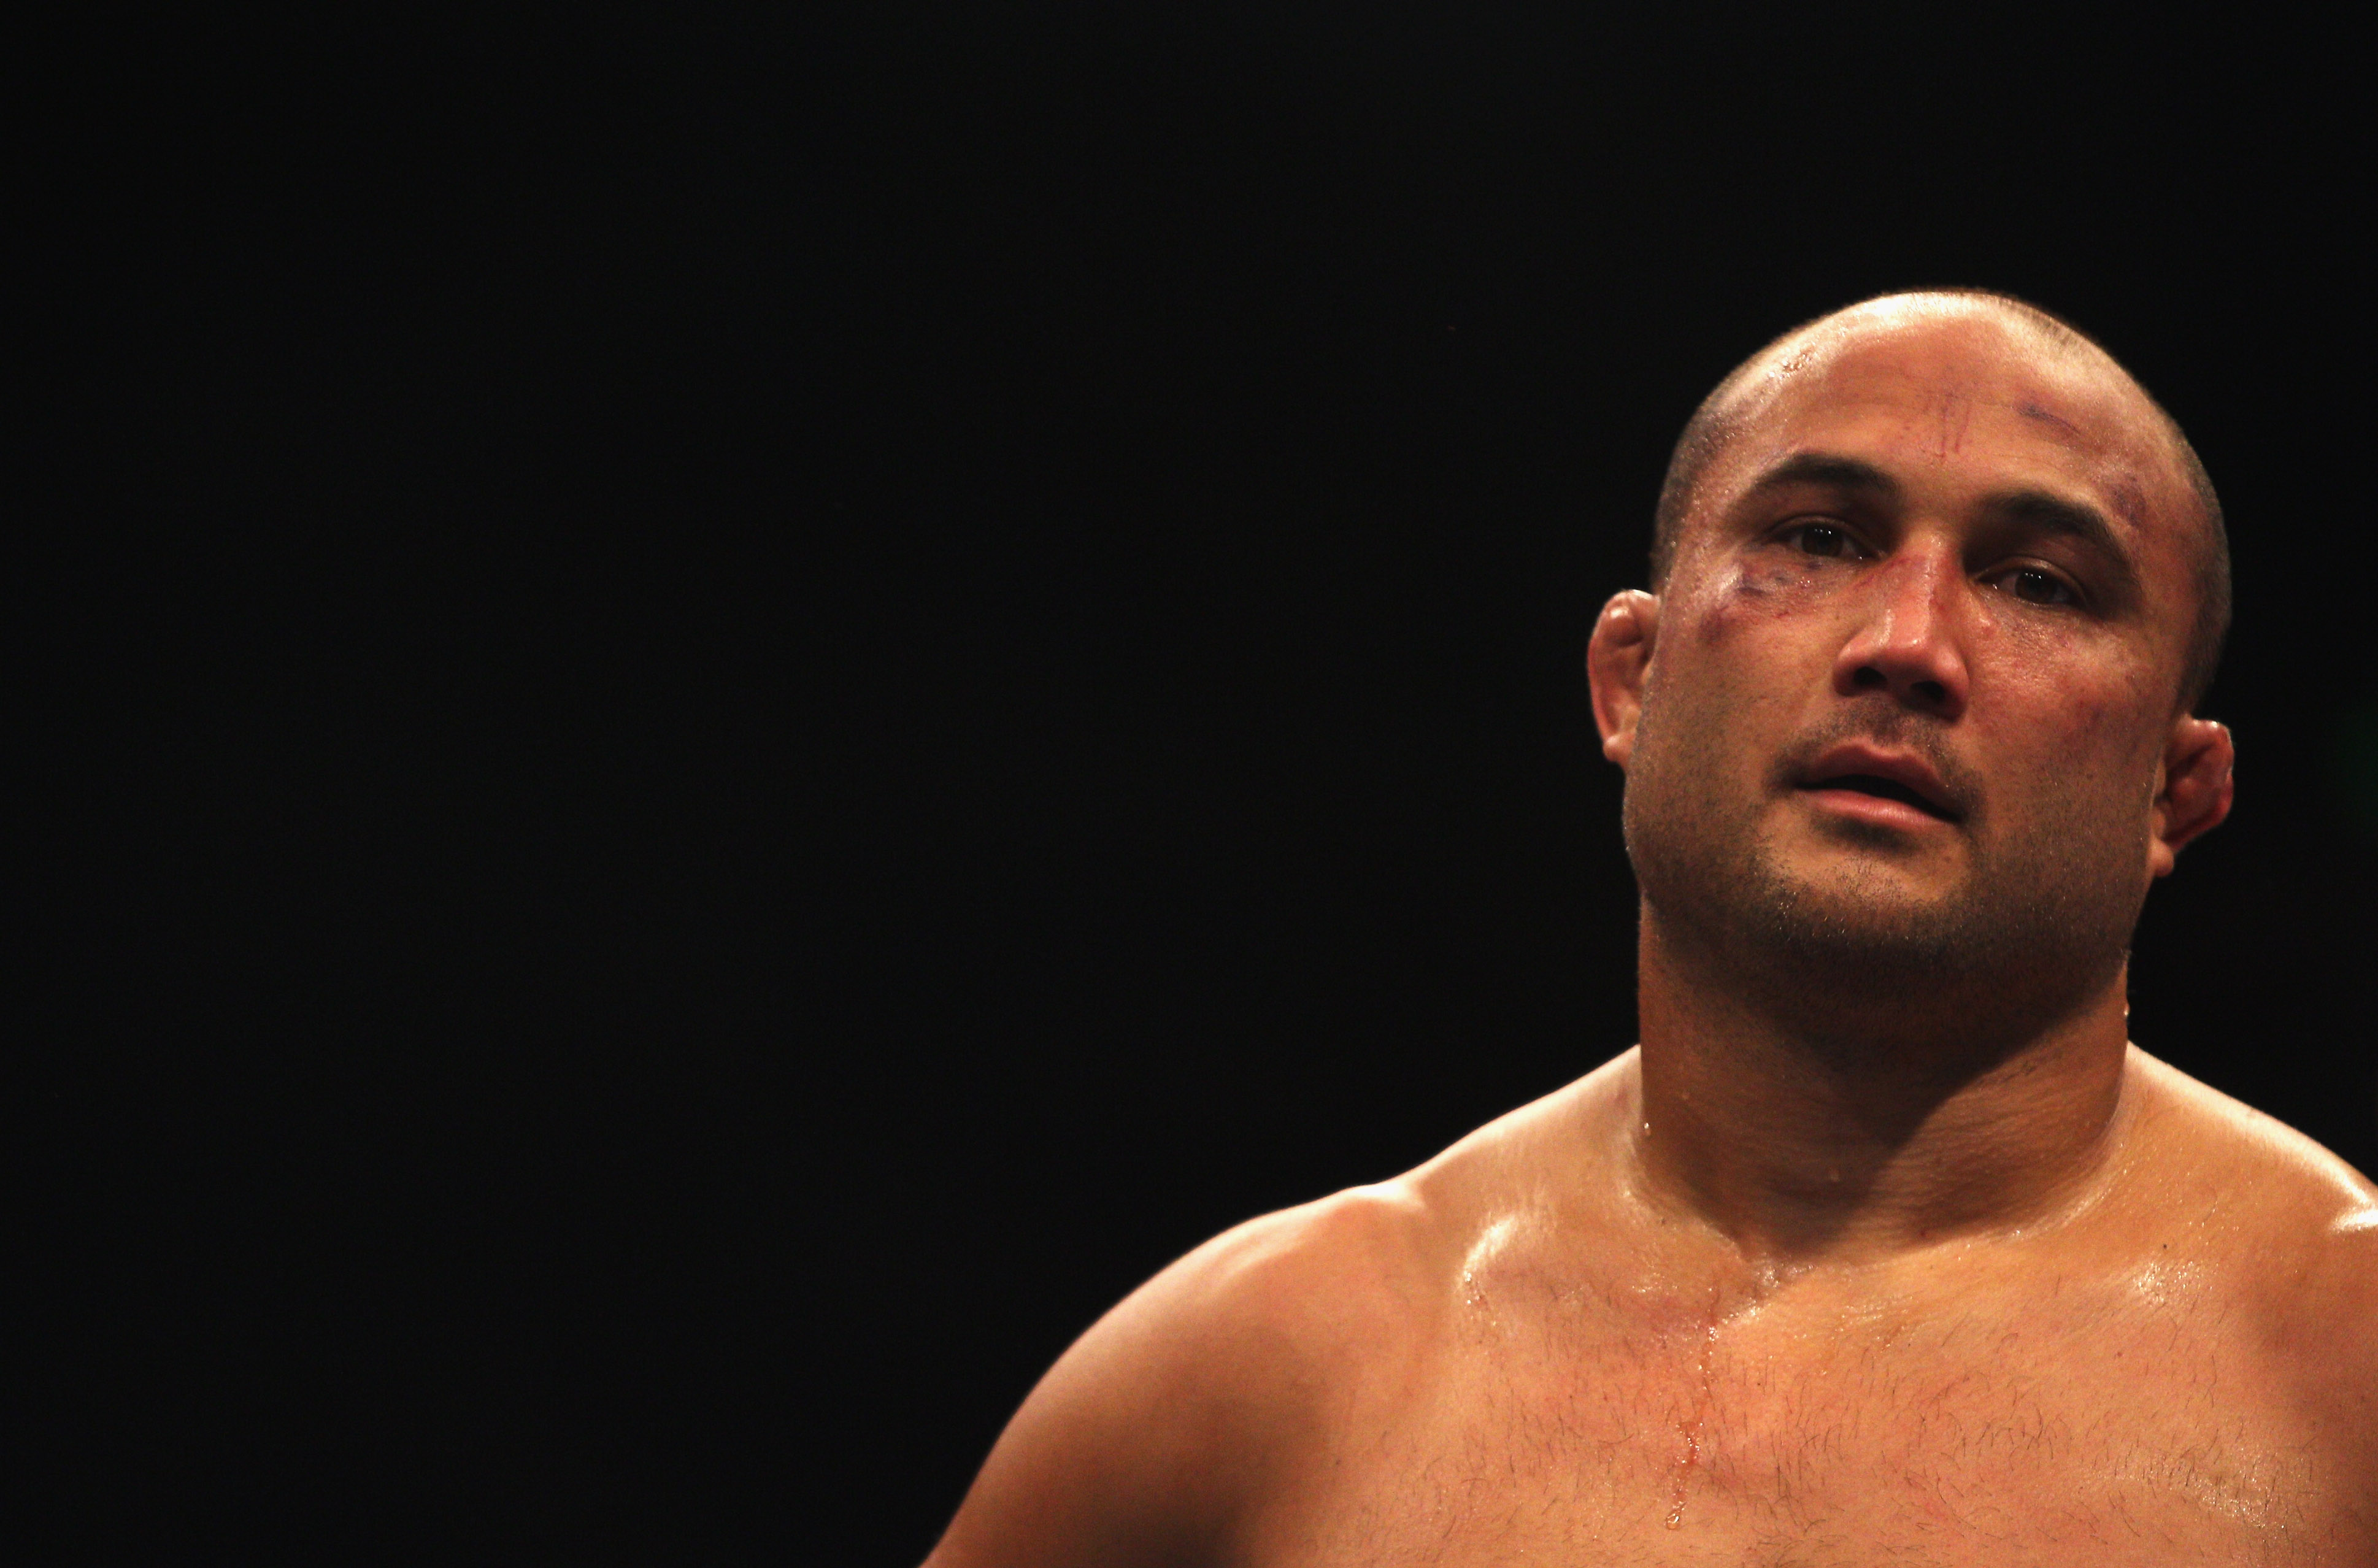 BJ Penn out of UFC 199 after doping violation.